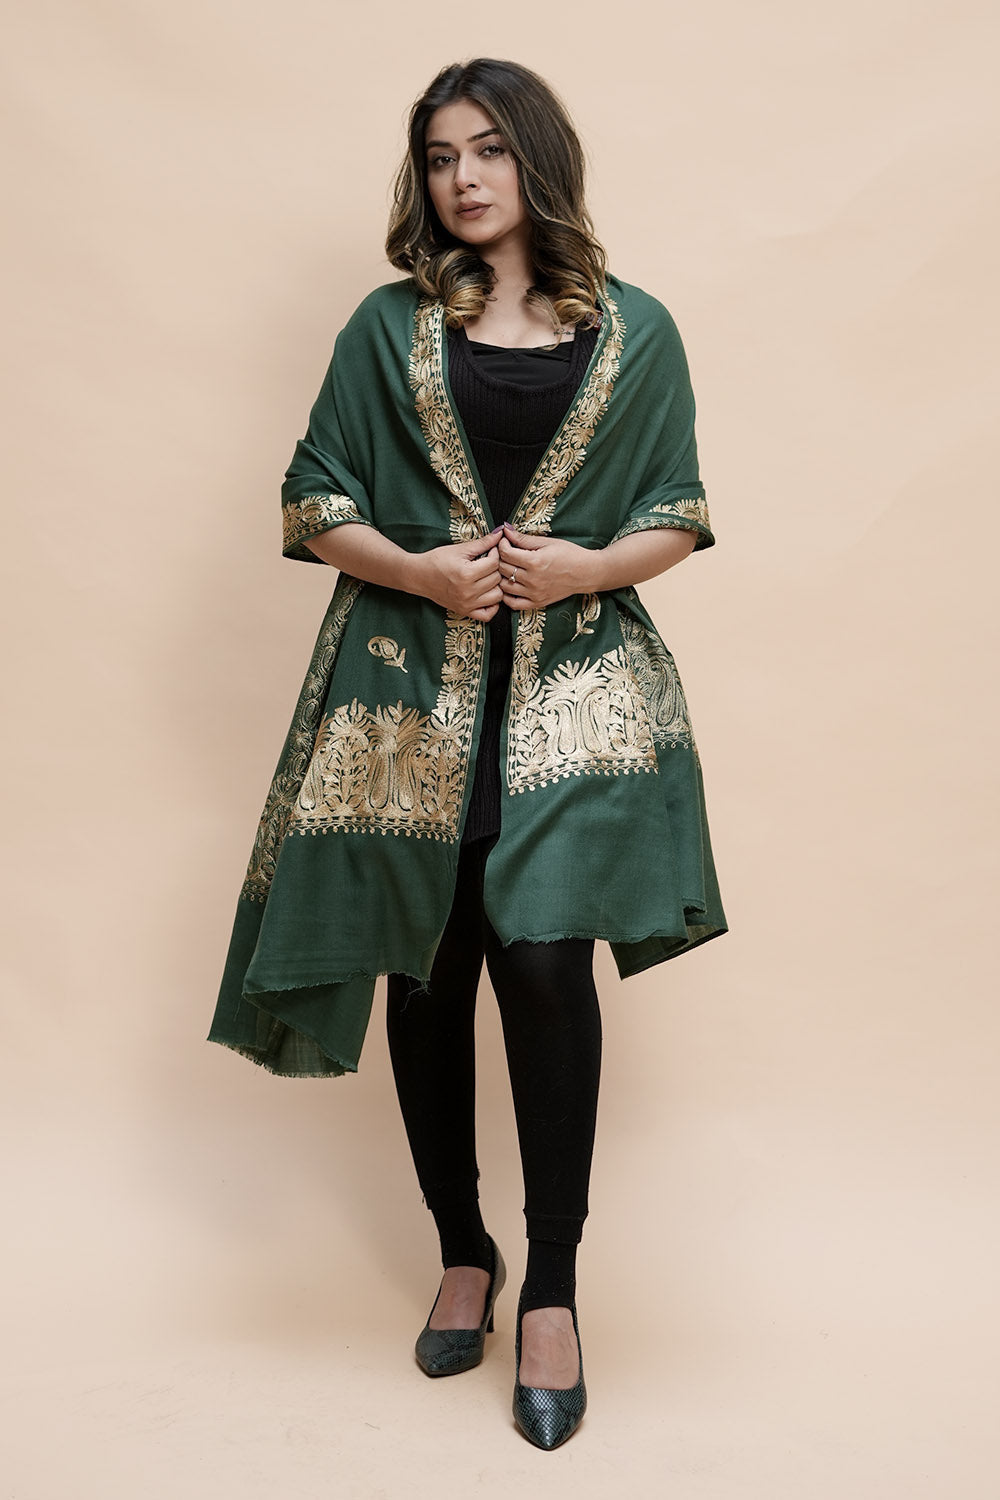 Green Colour Semi Pashmina Shawl Enriched With Ethnic Heavy